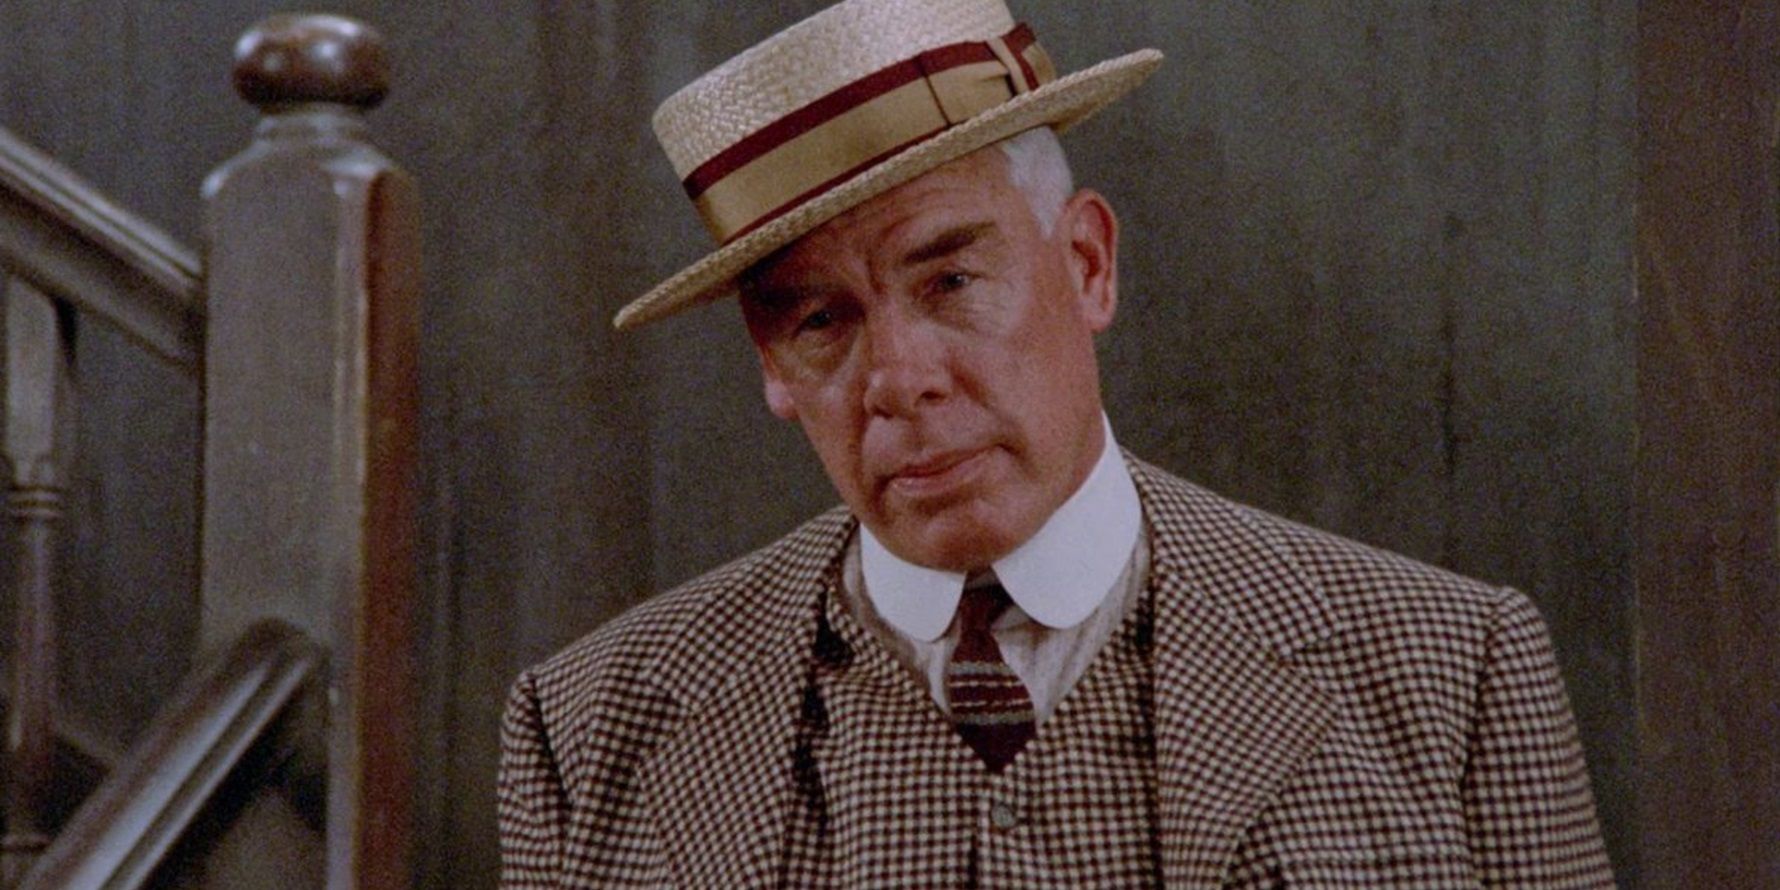 Lee Marvin with a hat in The Iceman Cometh